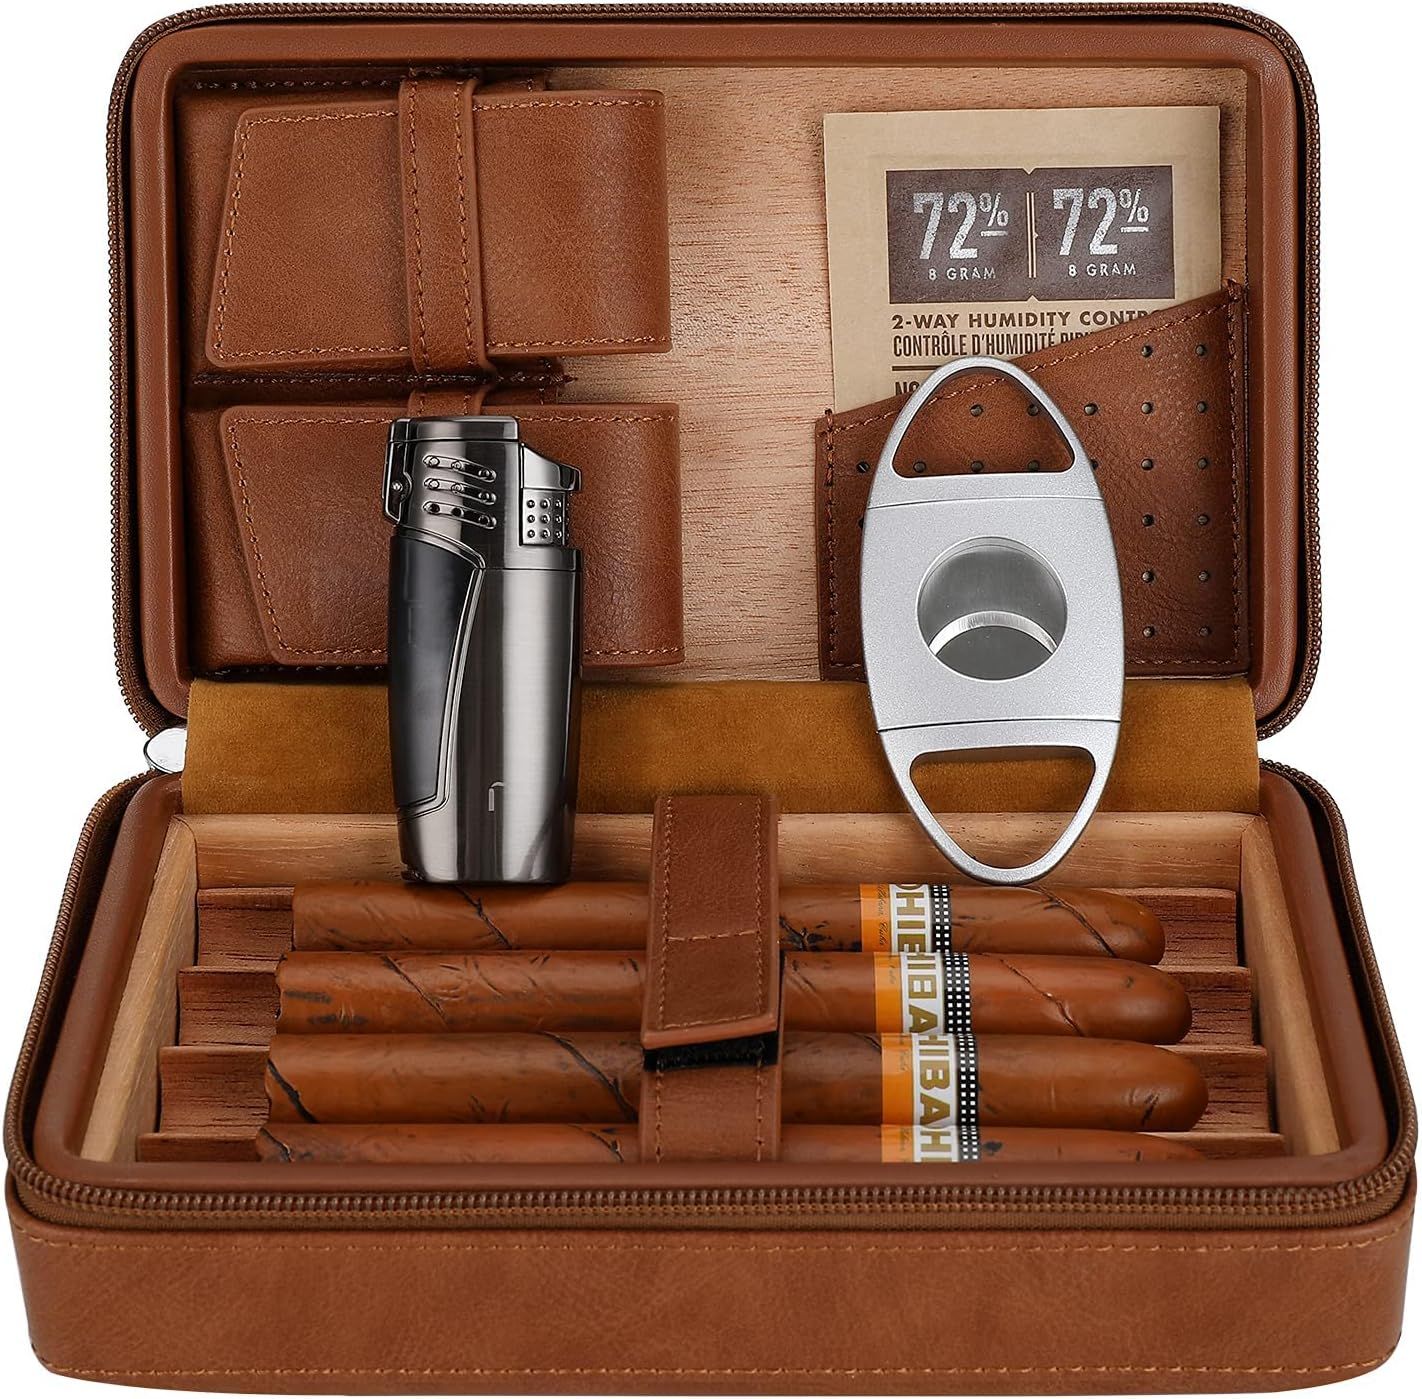 CiTree Cigar Travel Humidor, Cedar Wood Leather Cigar Case with Cigar Accessories Gift Set, Brown | Amazon (US)